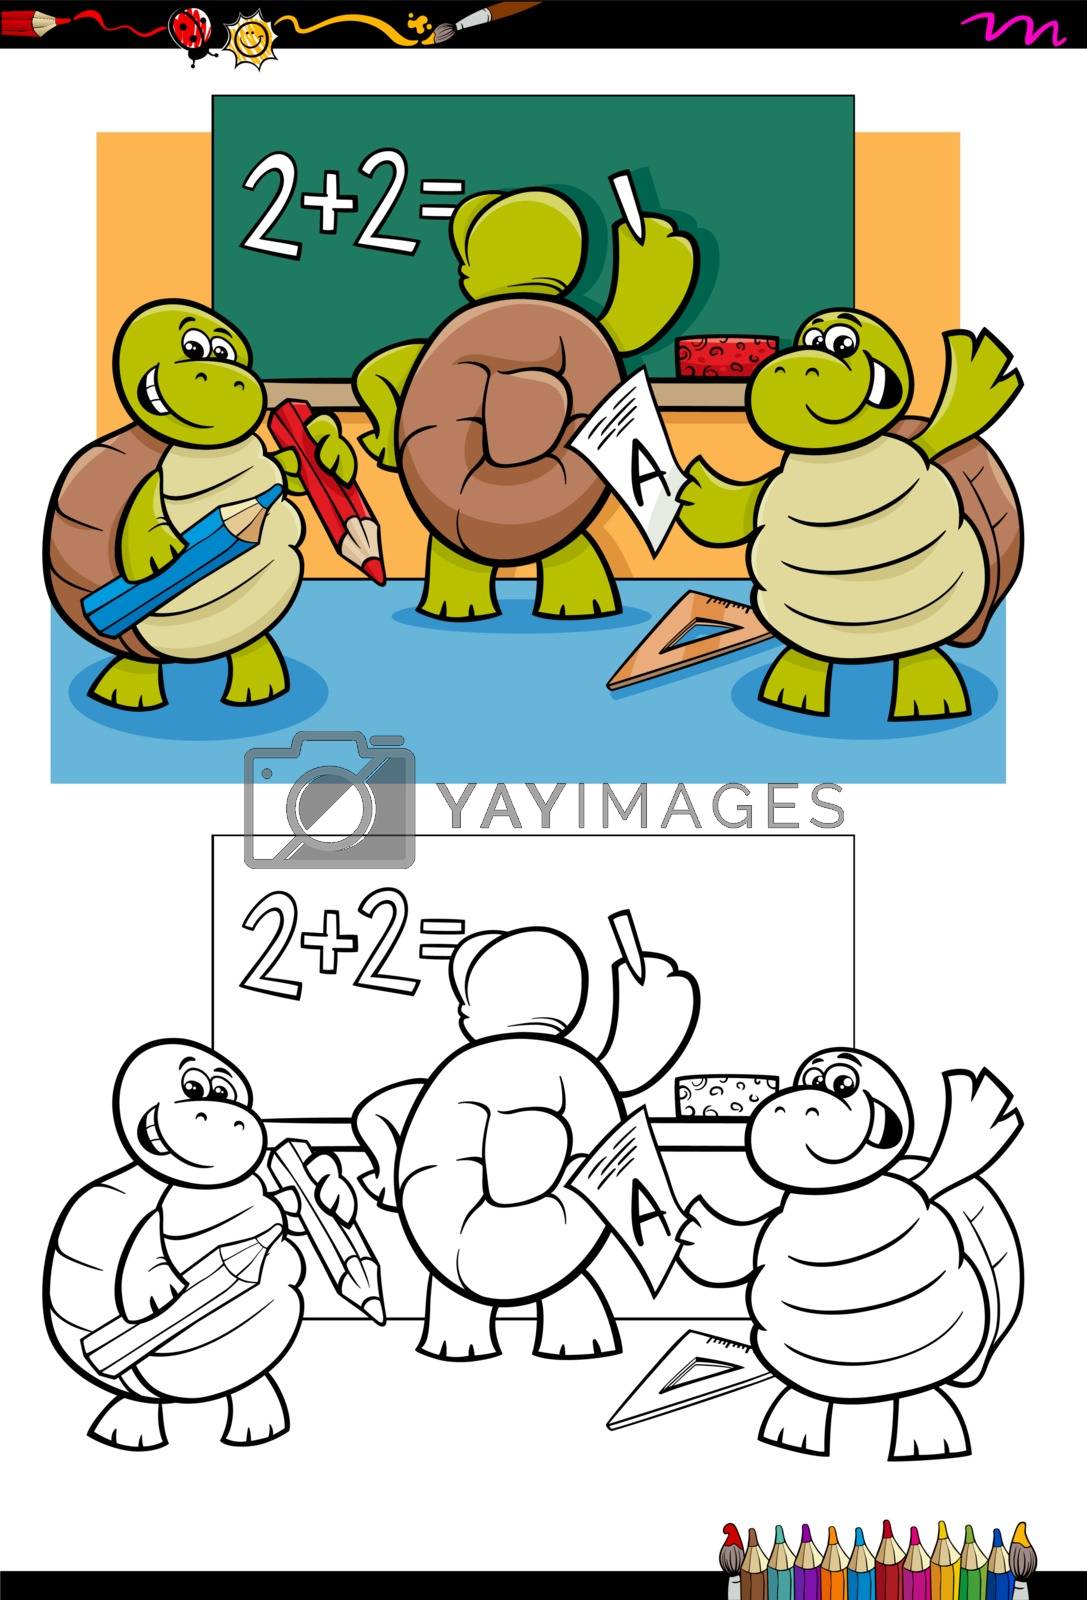 Royalty free image of turtles pupil characters coloring book by izakowski